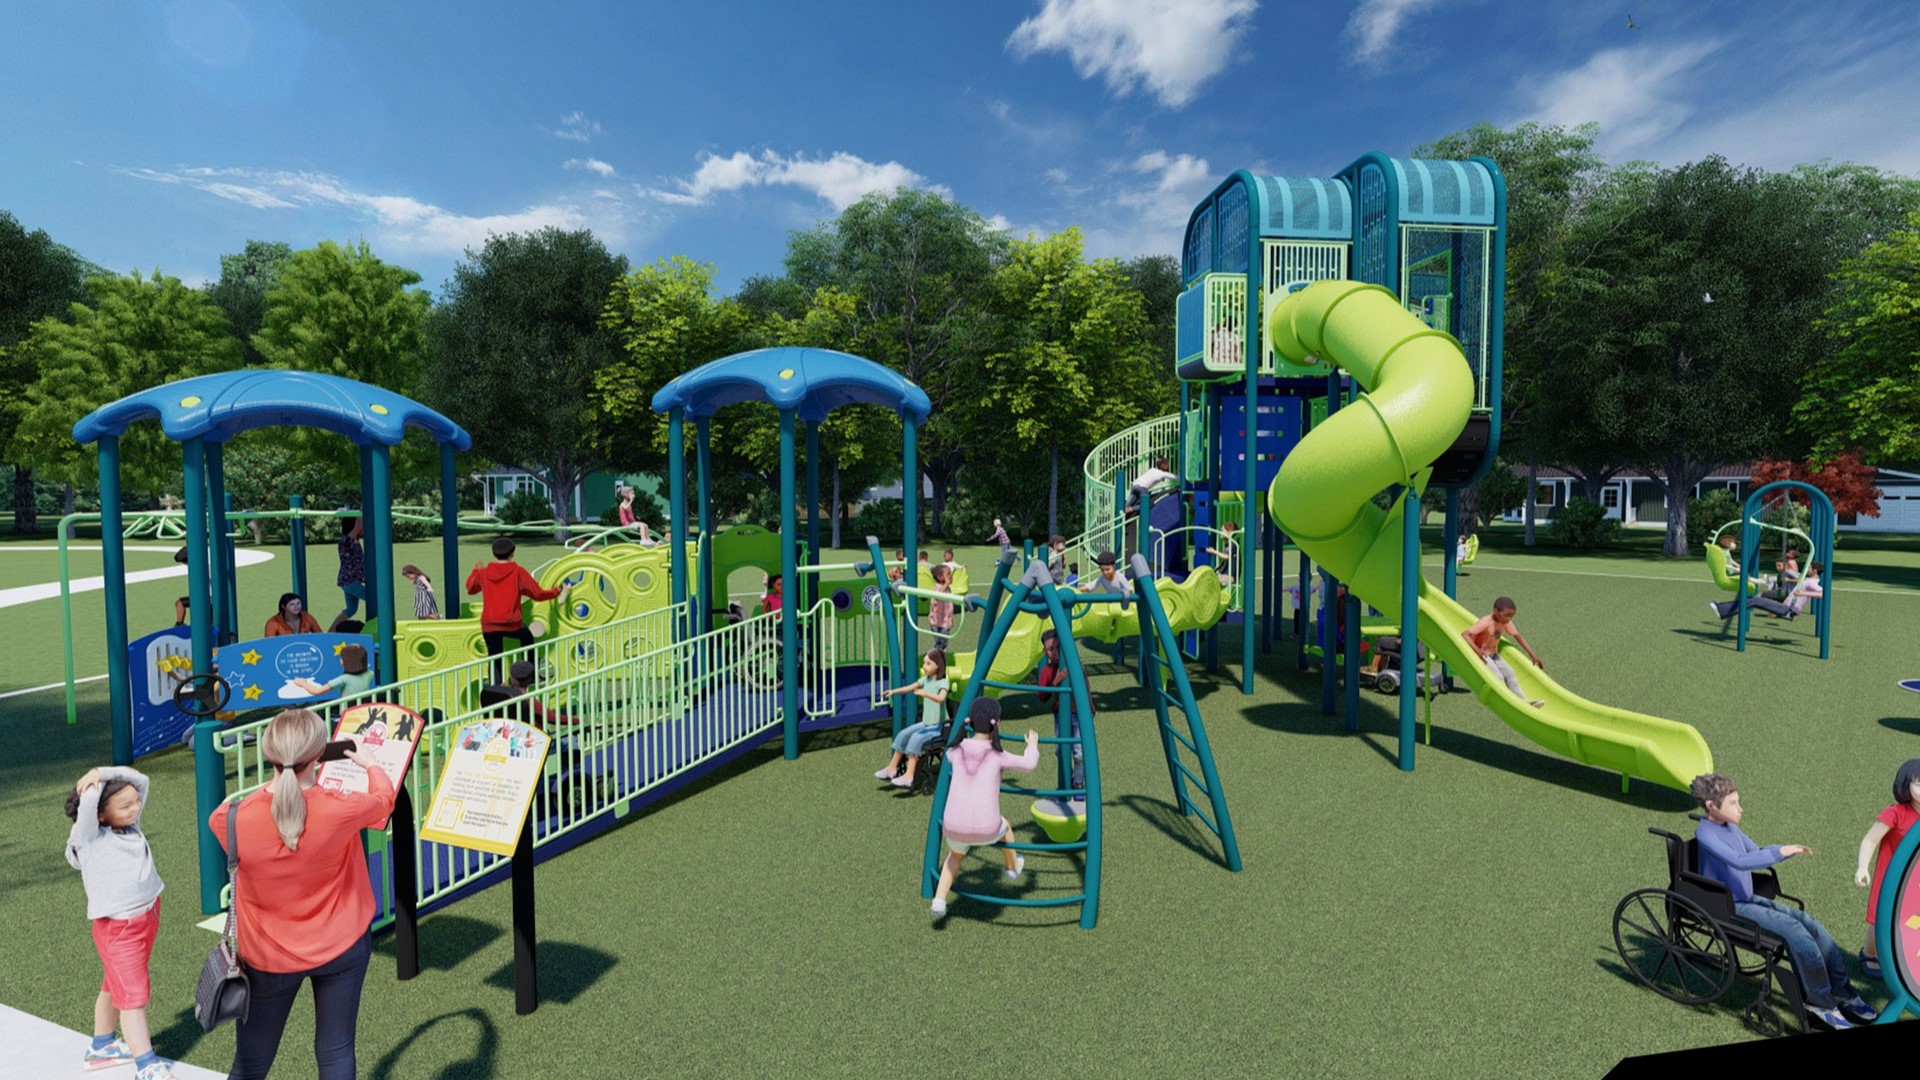 A voting period has opened up in order for the public to provide input on two new designs for the proposed playground.